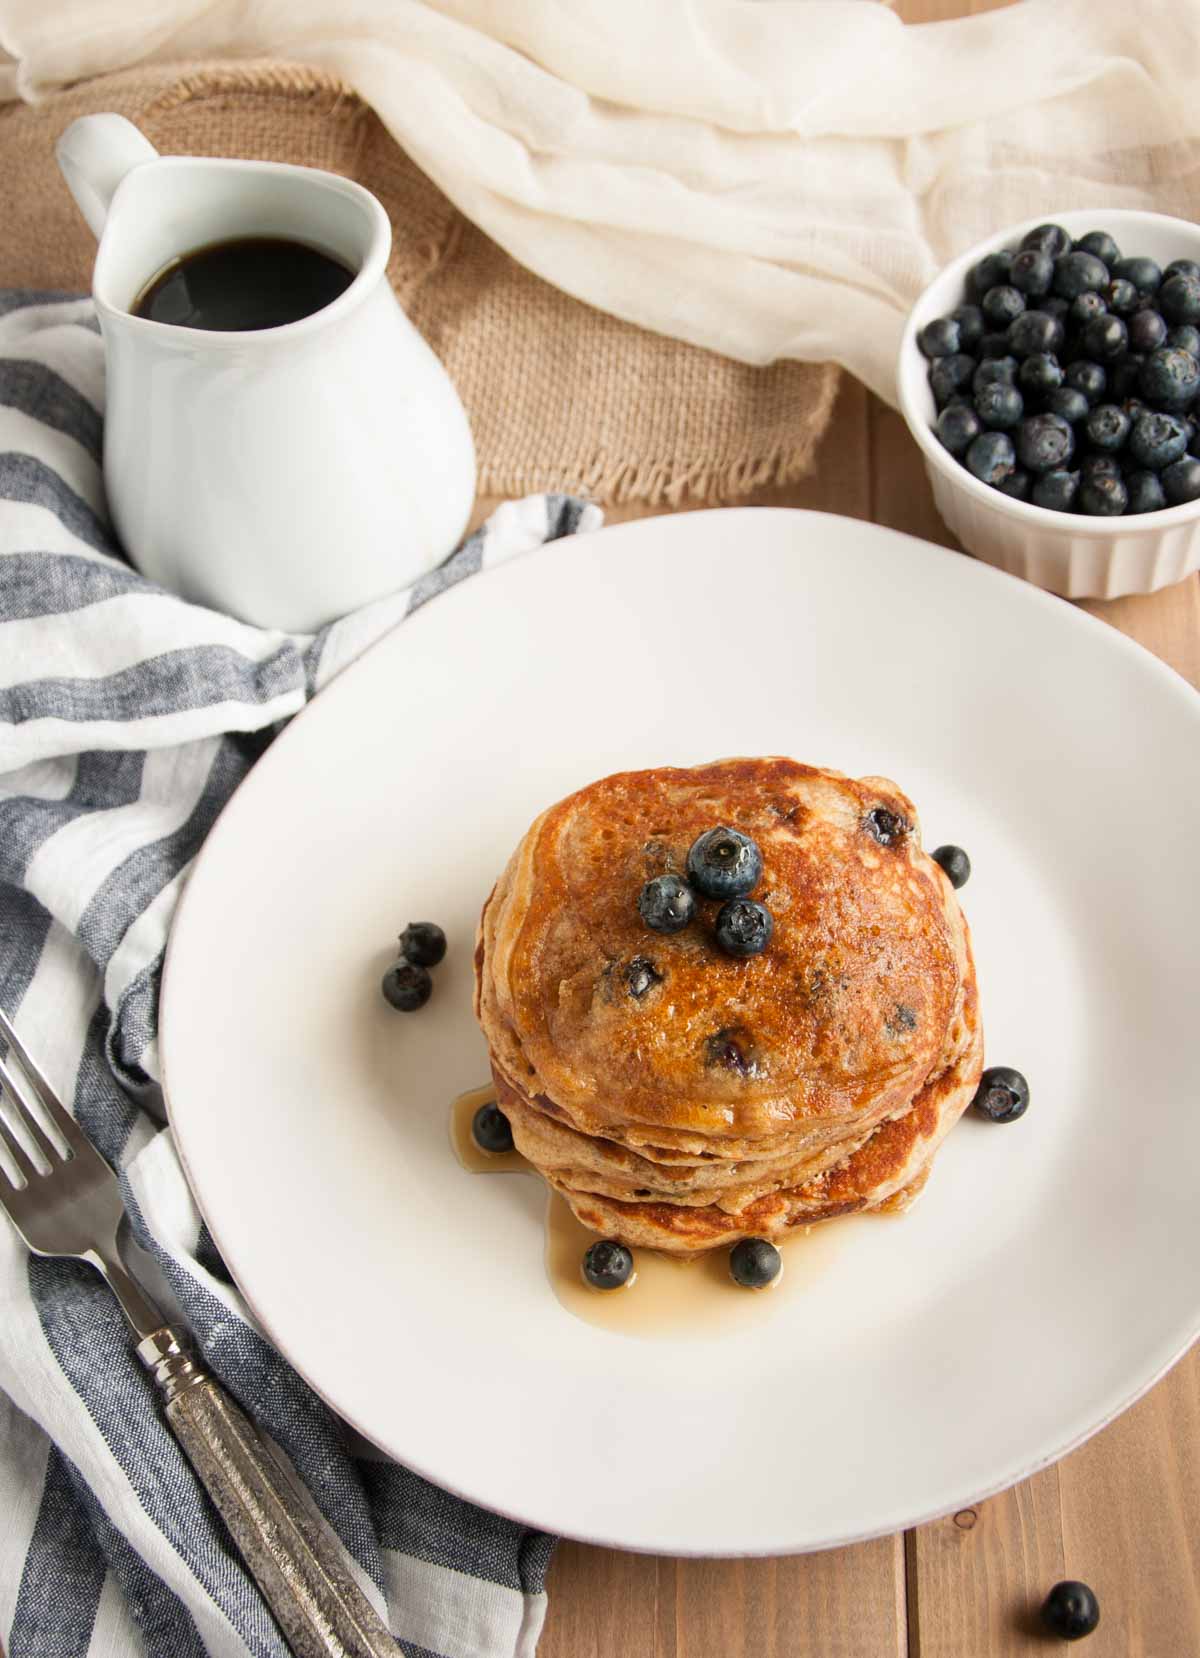 These thick, rich, delicious yogurt pancakes are a breakfast winner both in taste and nutrition, made with whole wheat flour, Greek yogurt, and blueberries.